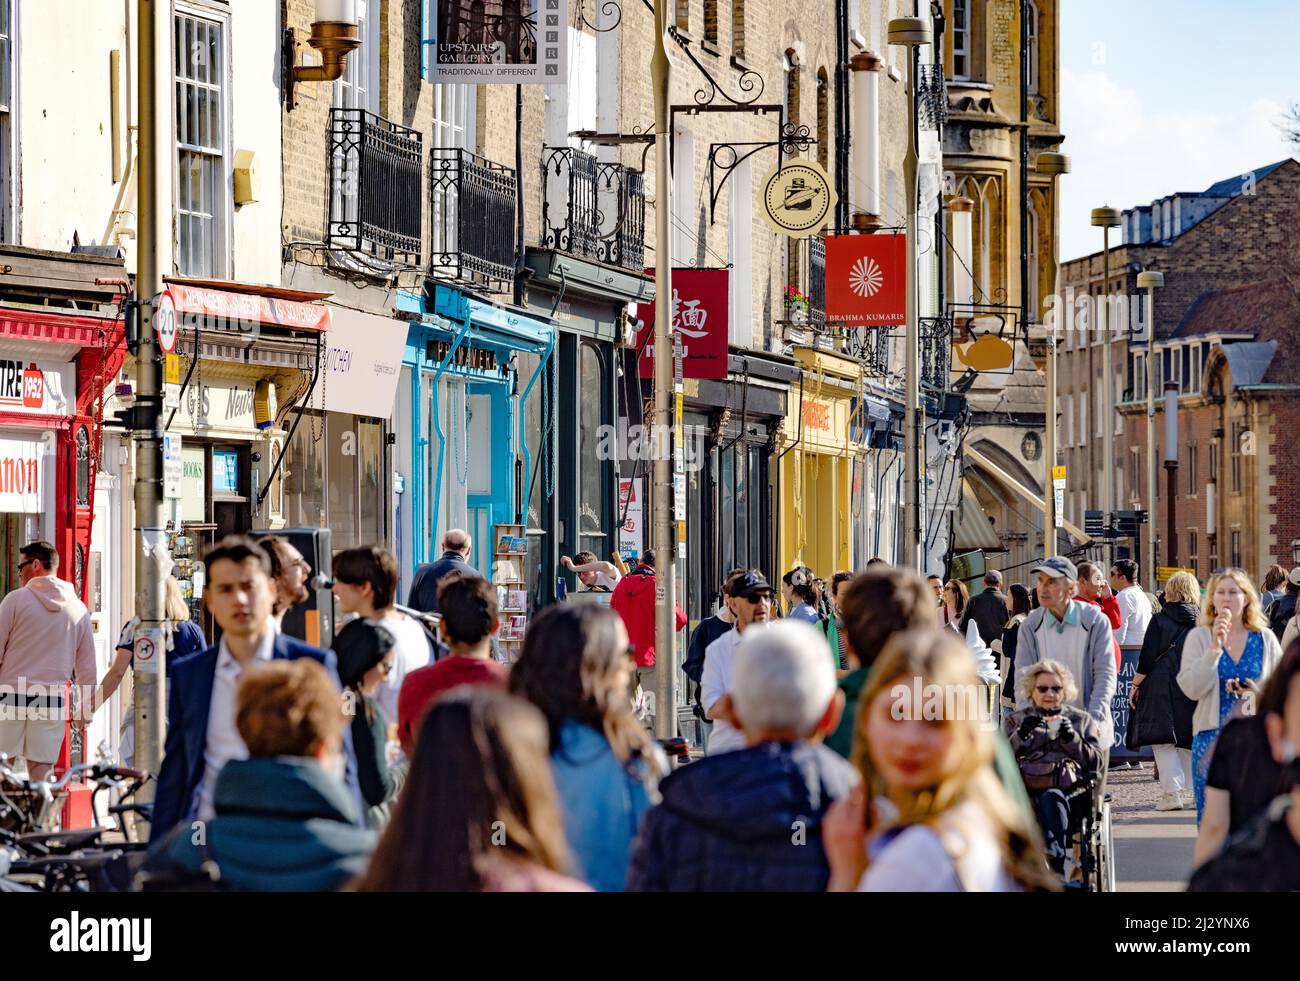 Normal British people - Crowd of people outside in a busy crowded street with shops, Kings Parade Cambridge UK - normal life UK Stock Photo